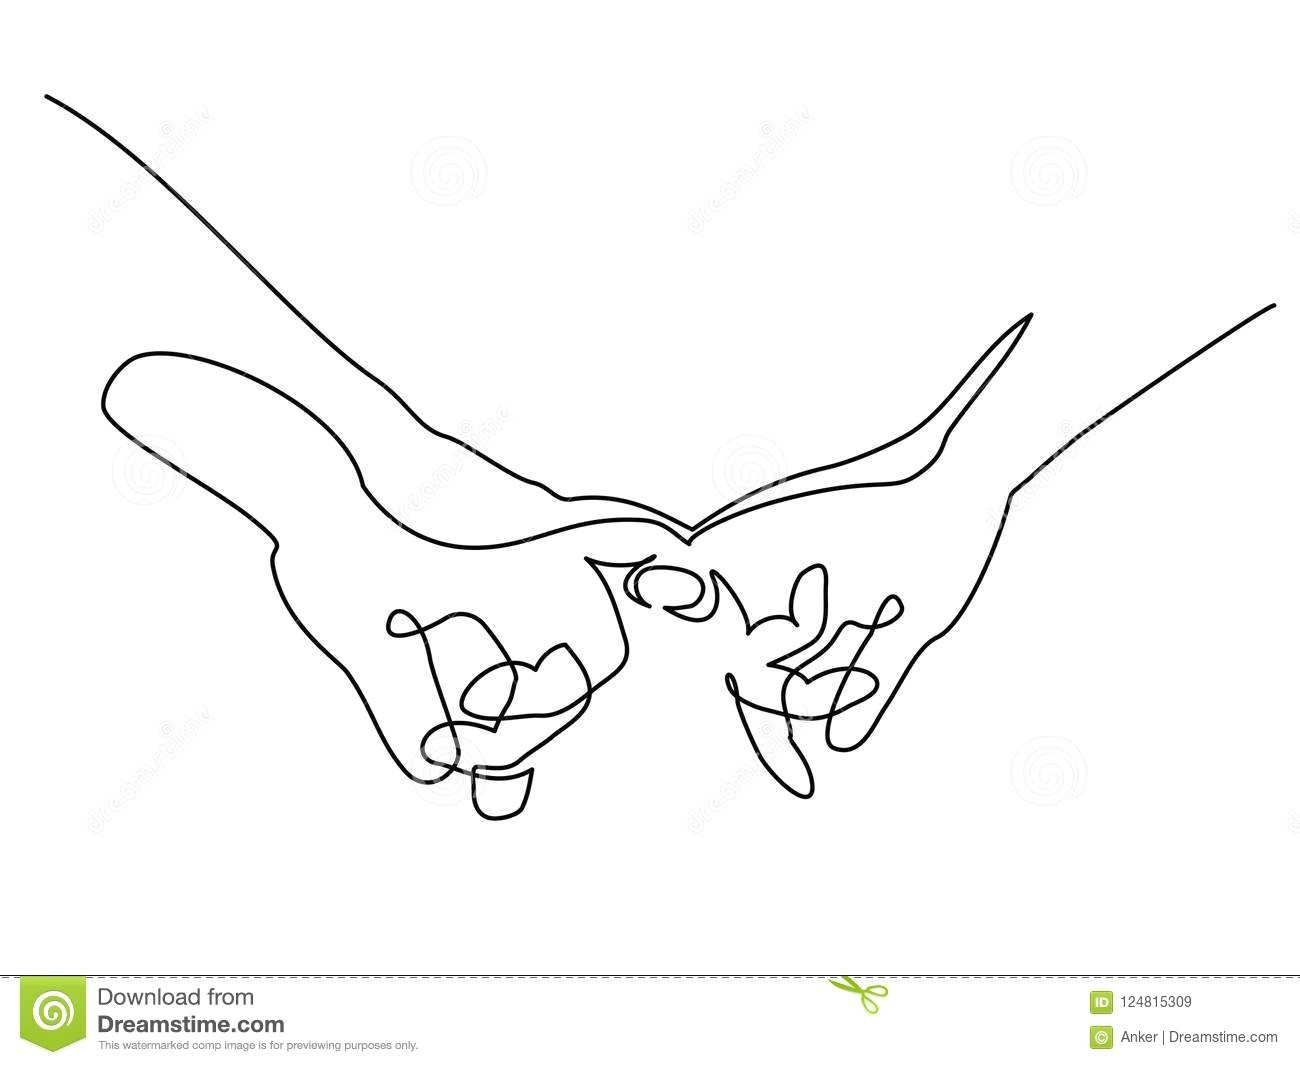 Drawing Hands with Lines Hands Woman and Man Holding together with Fingers Stock Vector